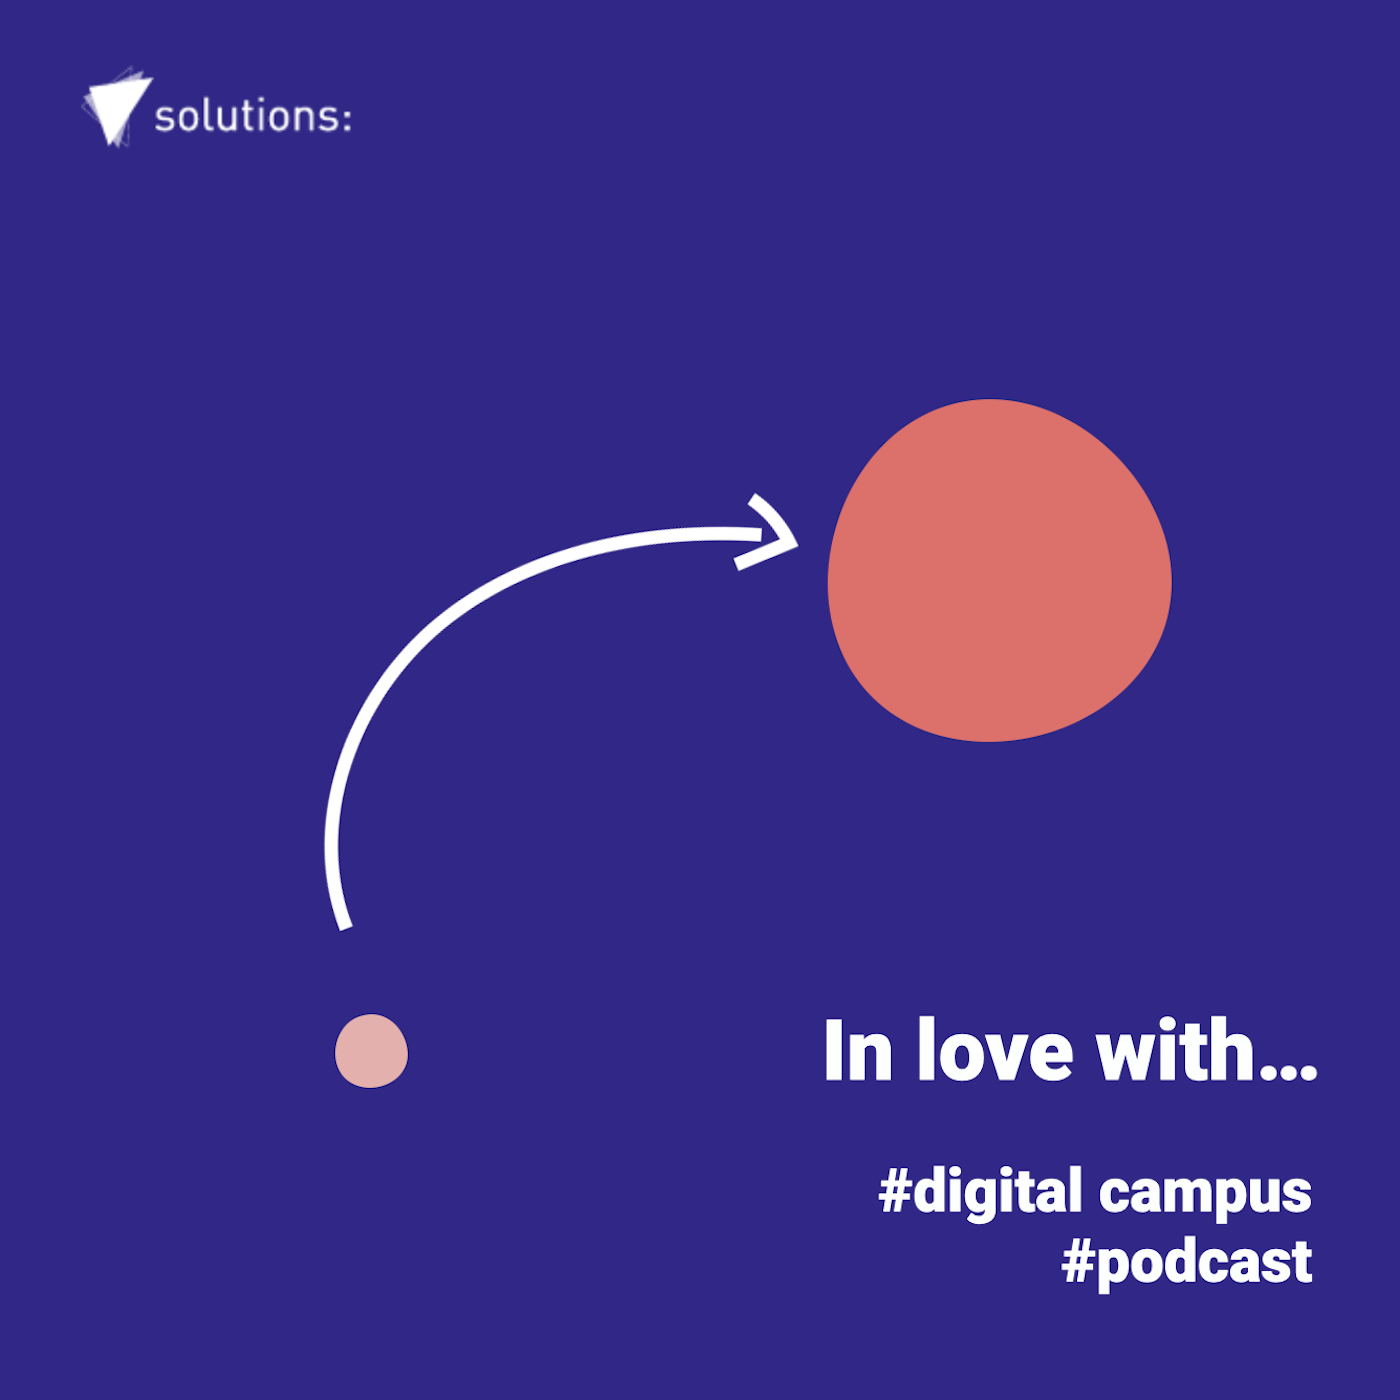 in love with ... der solutions: digital campus podcast